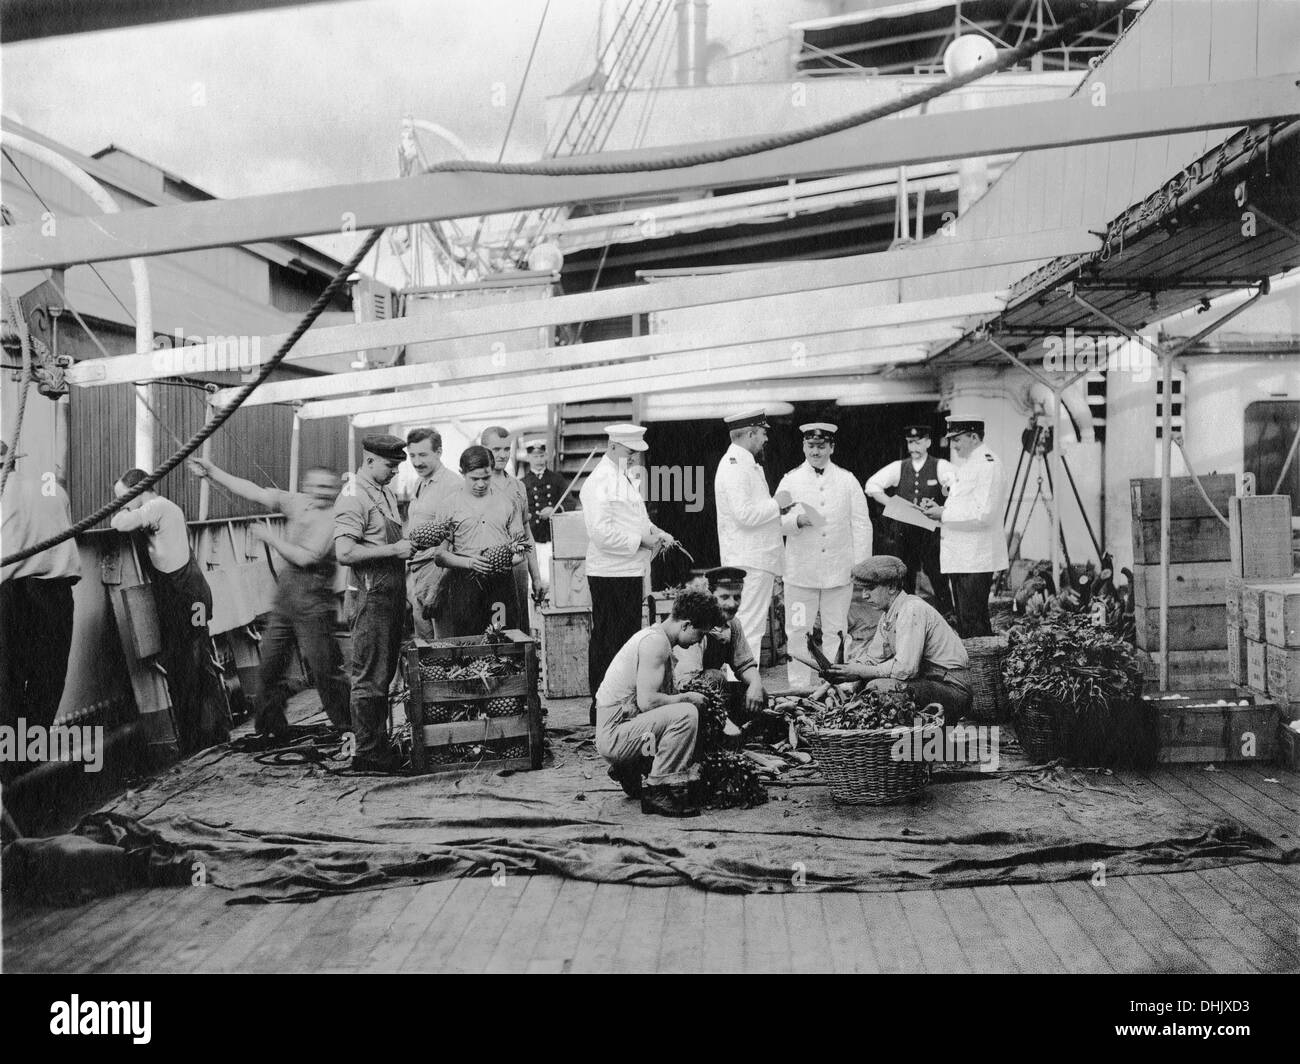 Food supplies are brought aboard an ocean liner ('Cleveland'?). Crew members examine pineapples, corn, and onions and check the list of deliveries, undate photograph (around 1911/1913). The image was taken by the German photographer Oswald Lübeck, one of the earliest representatives of travel photography and ship photography aboard passenger ships. Photo: Deutsche Fotothek/Oswald Lübeck Stock Photo